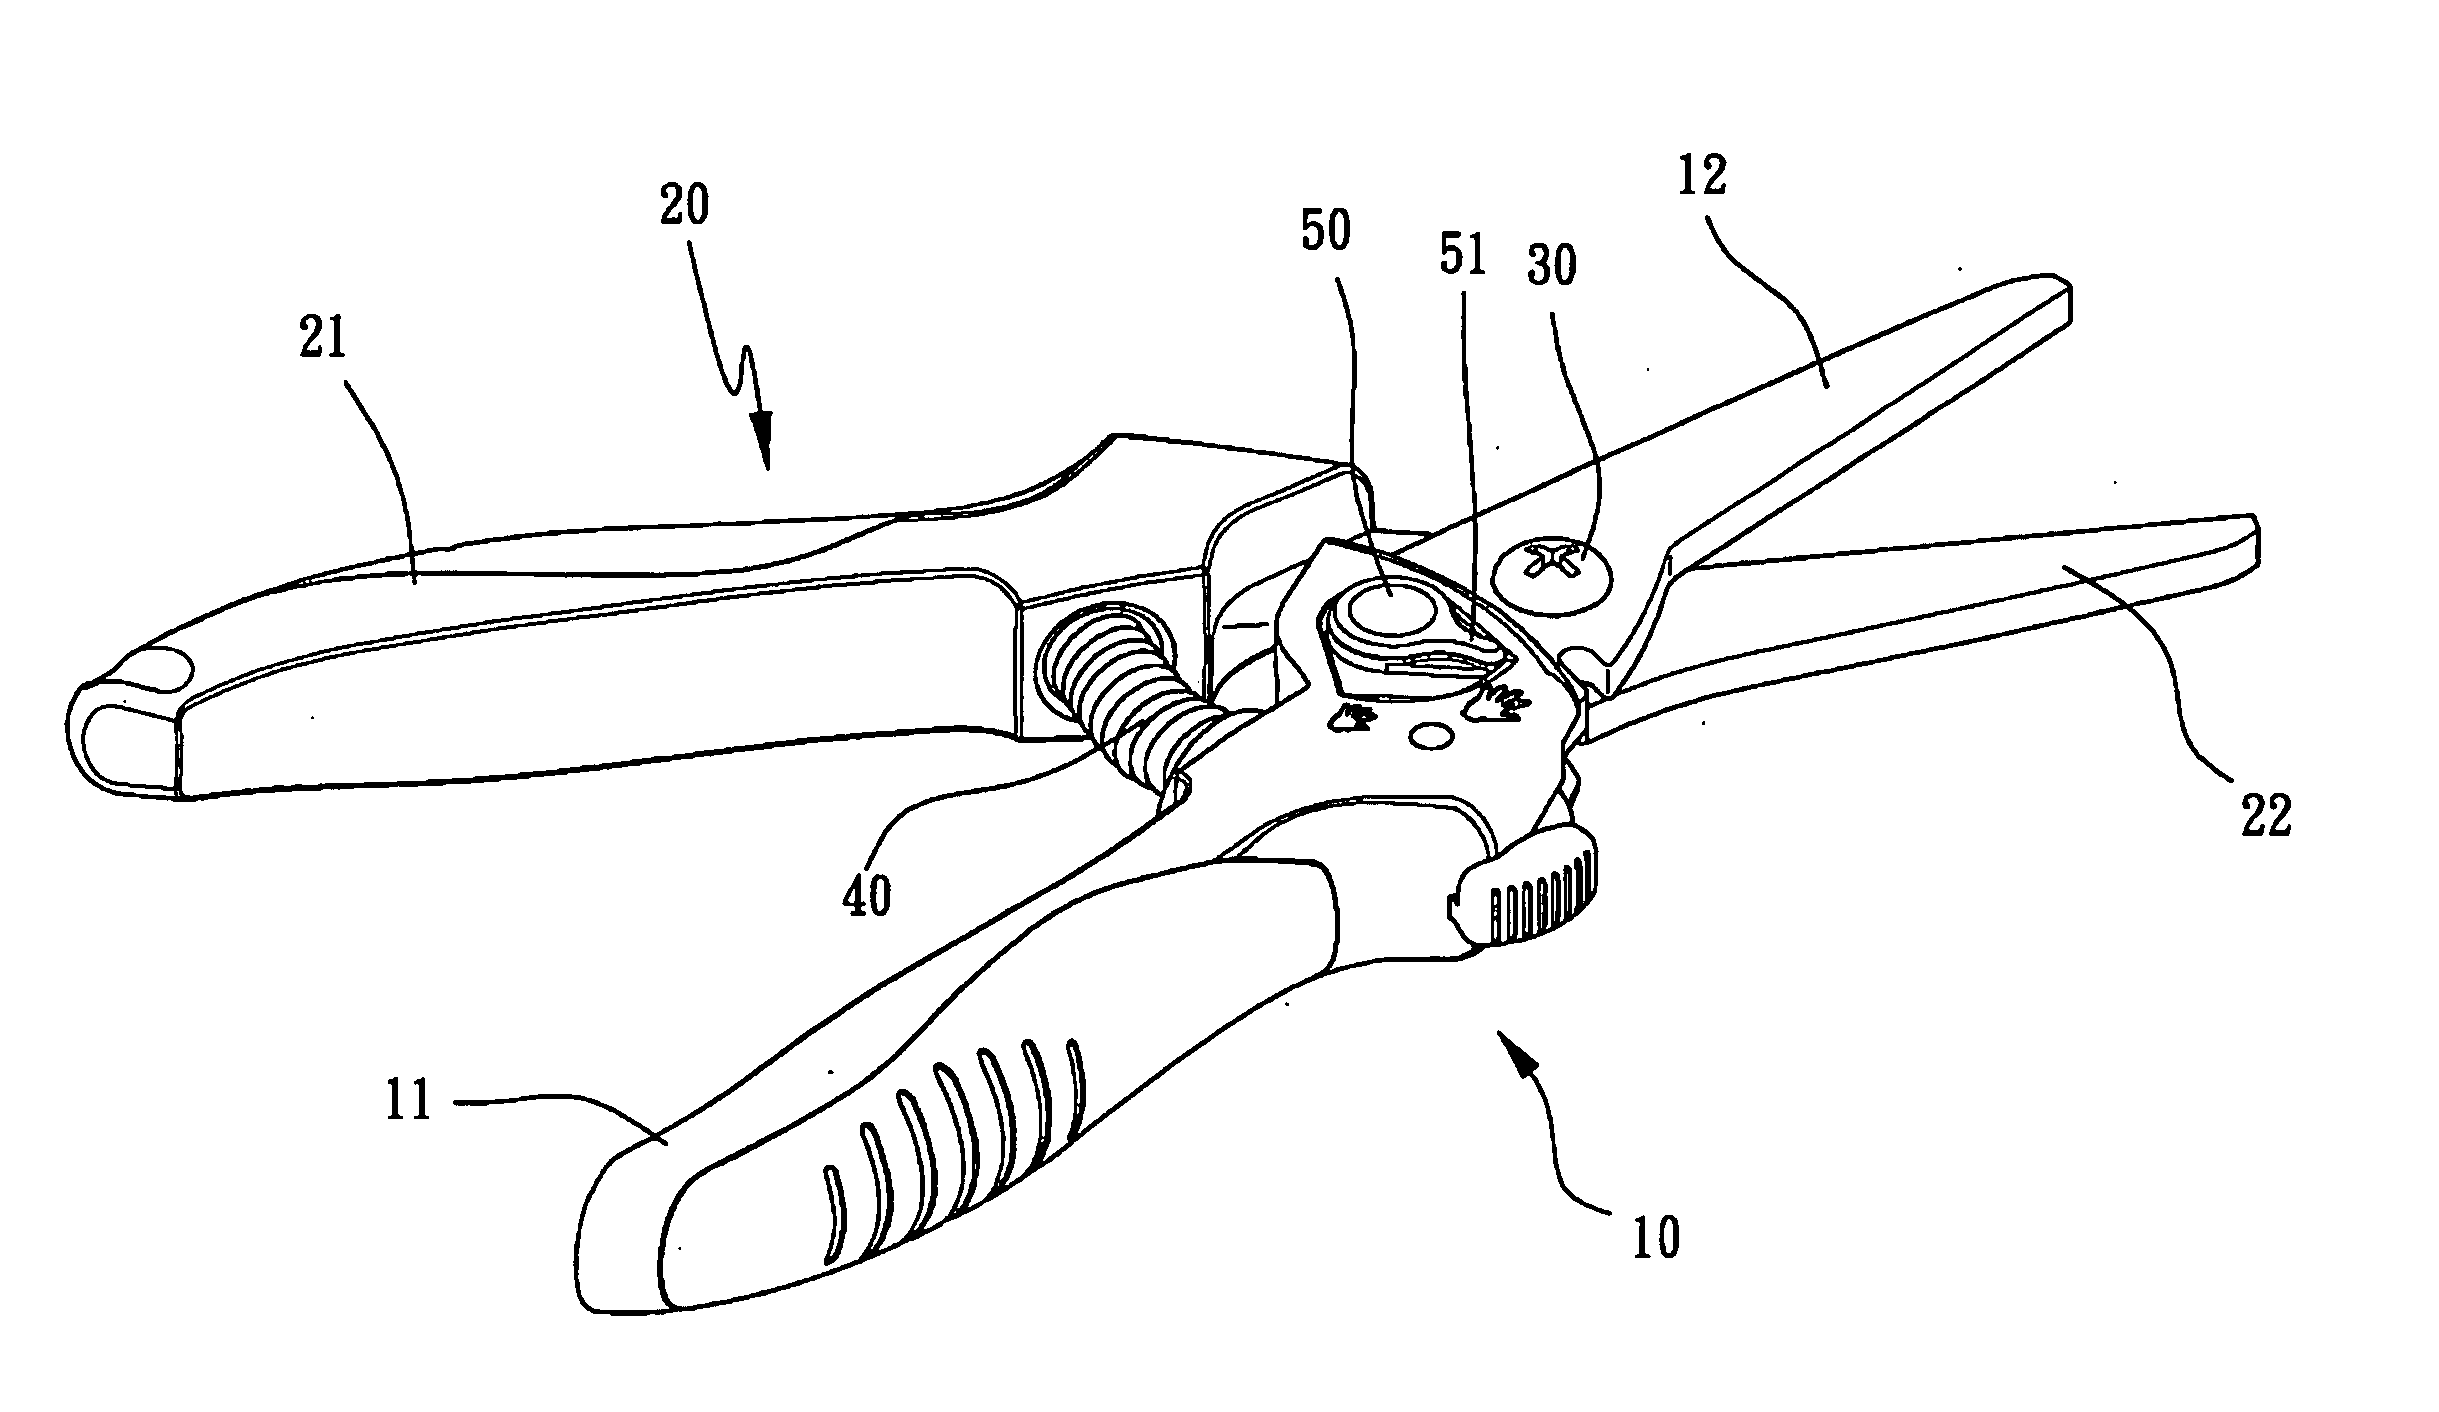 Control Mechanism for Controlling Width of Two Cutting Blades